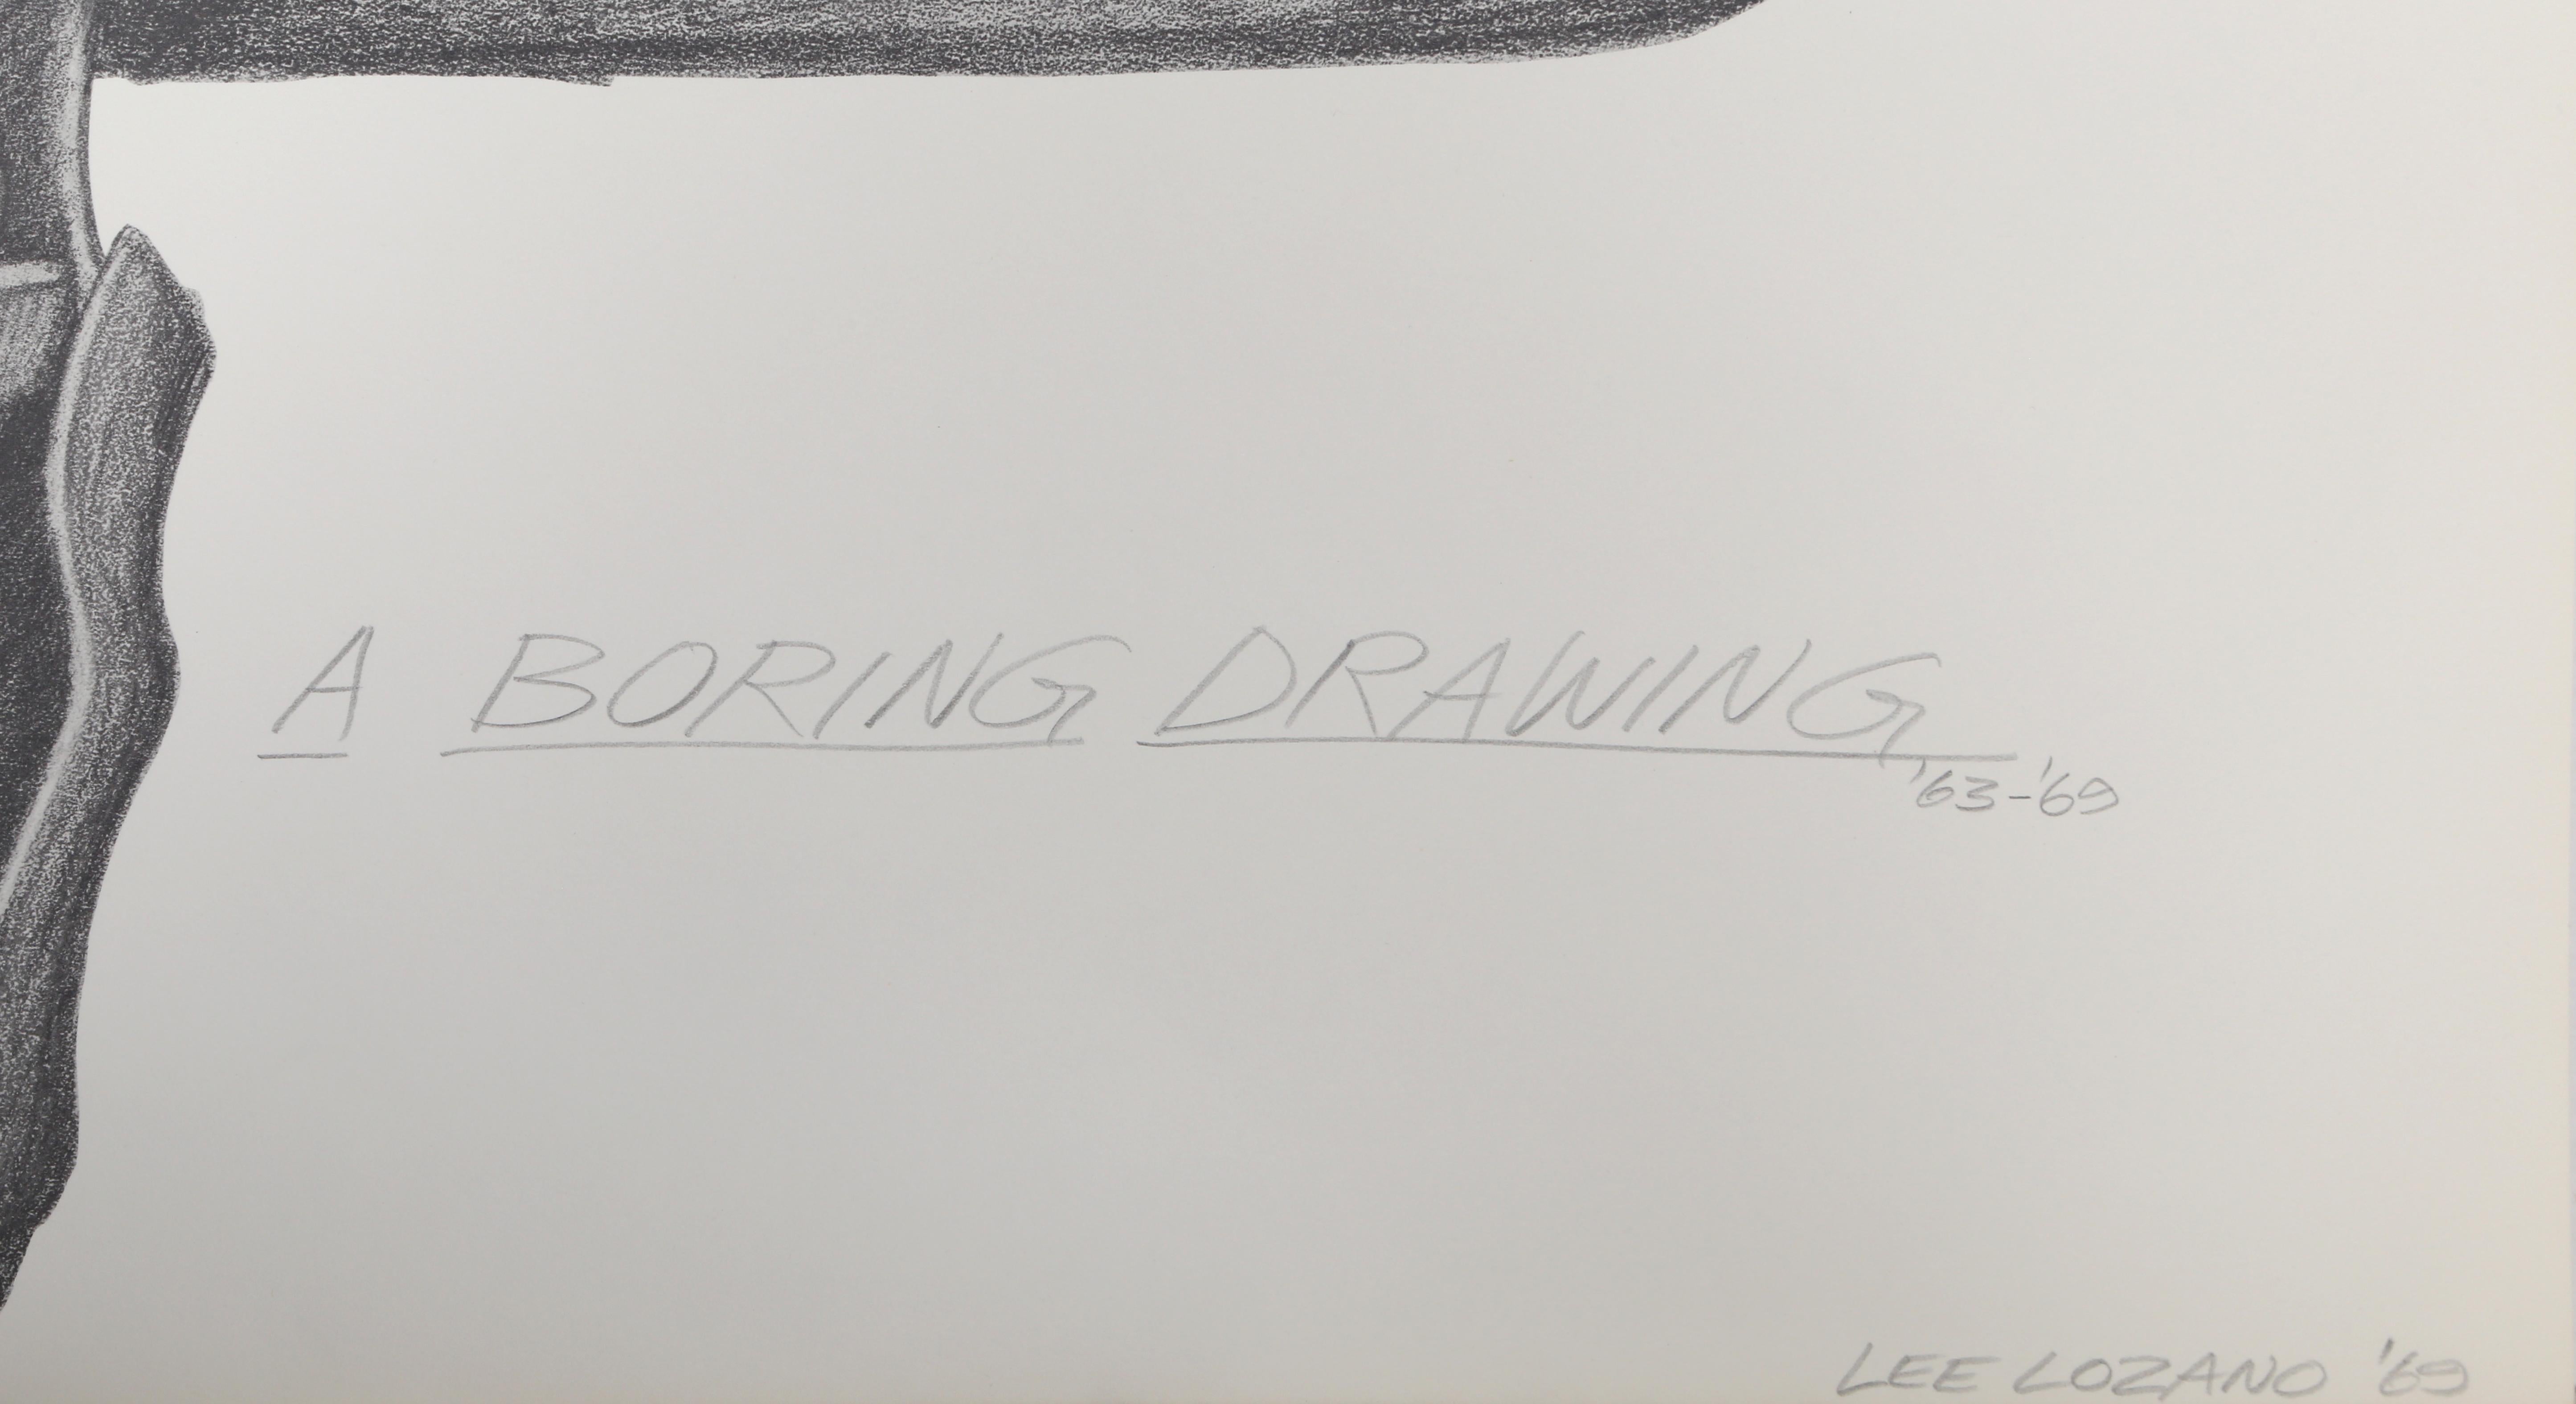 Artist: Lee Lozano, American (1930 - 1999)
Title: A Boring Drawing
Year: 1969
Medium: Photo-lithograph, signed, numbered, and dated in pencil 
Edition: 67/100
Size: 20 x 26 in. (50.8 x 66.04 cm)

Published by Tanglewood Press, Inc., New York